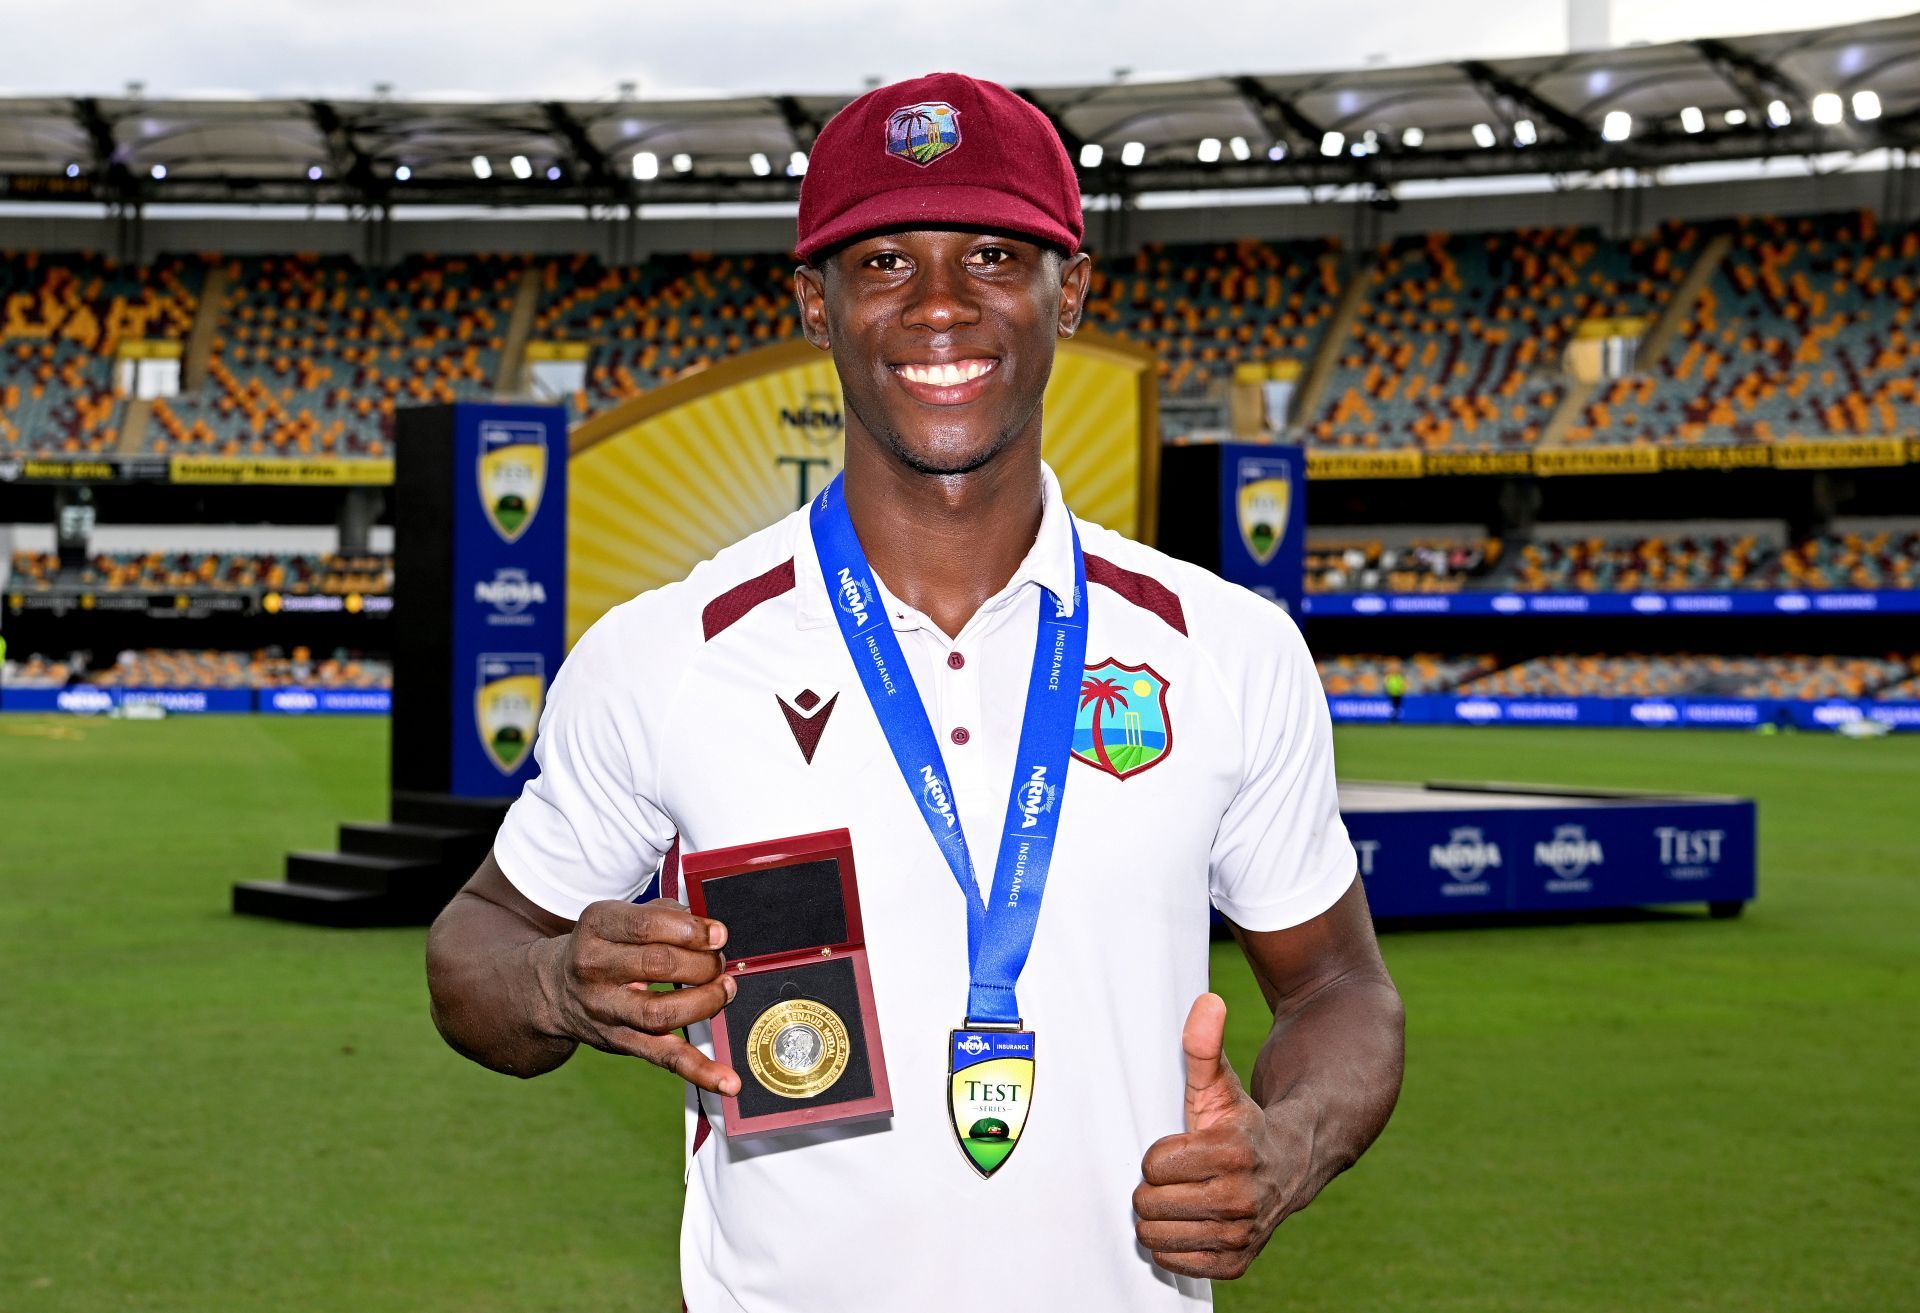 Shamar Joseph was the Player of the Match and the Player of the Series